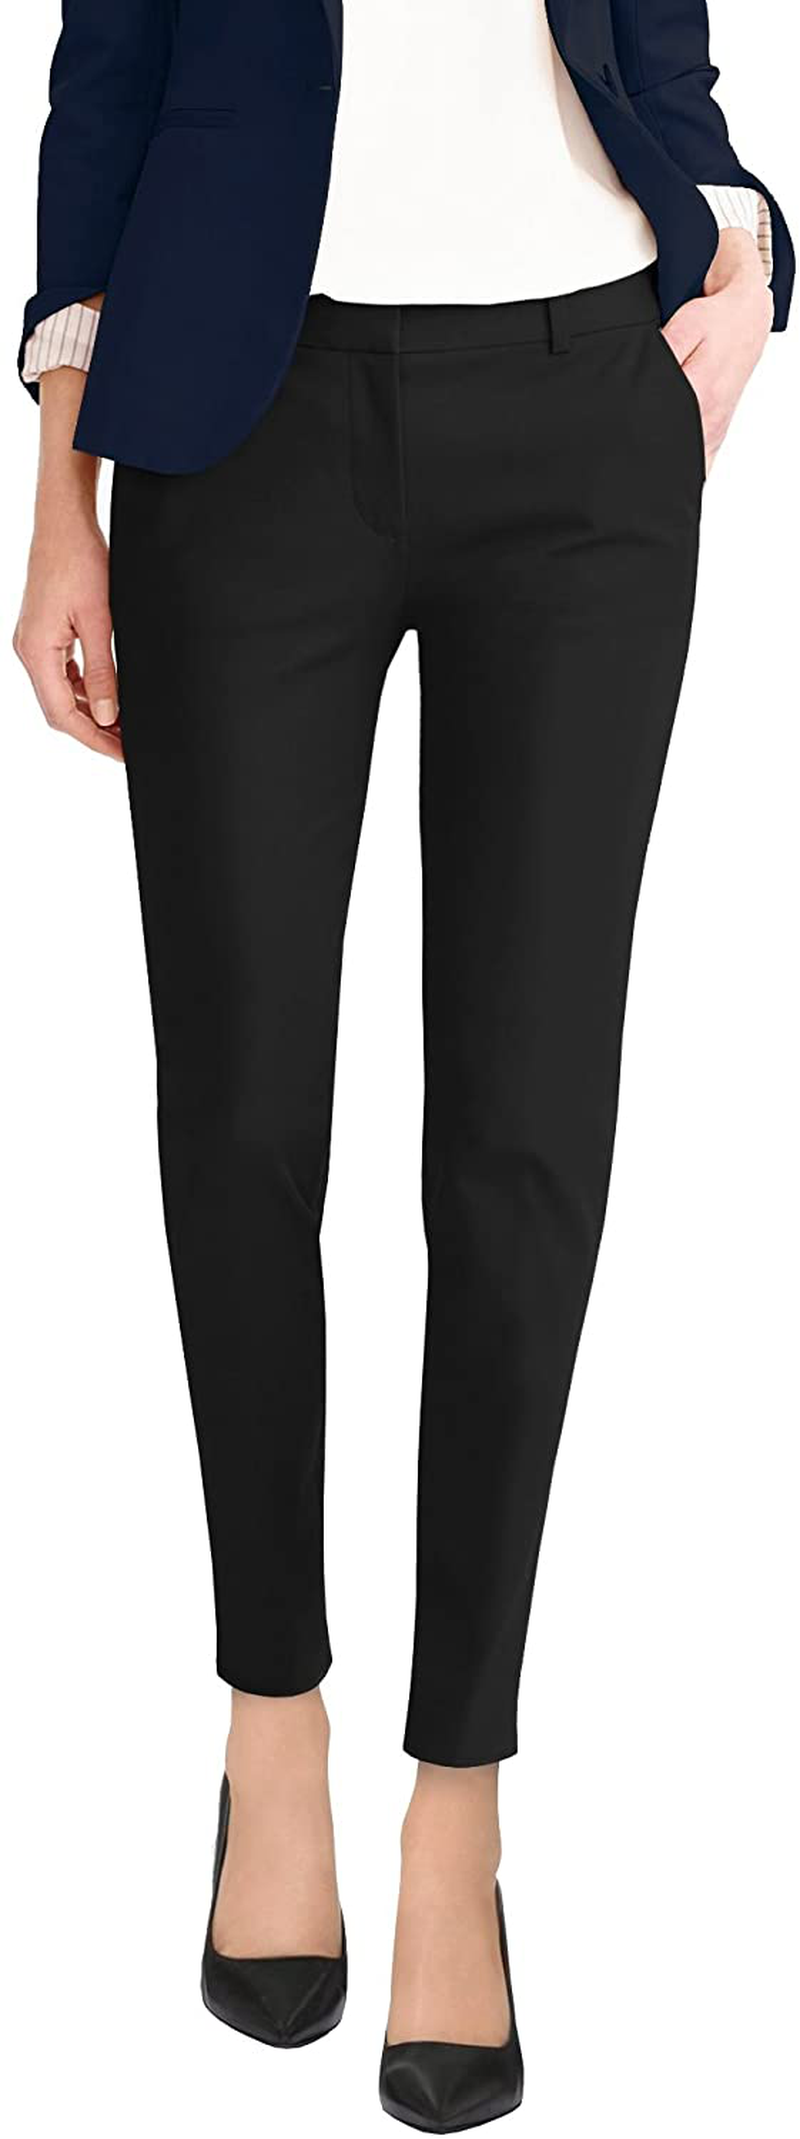 Hybrid & Company Womens Super Comfy Flat Front Stretch Trousers Pants